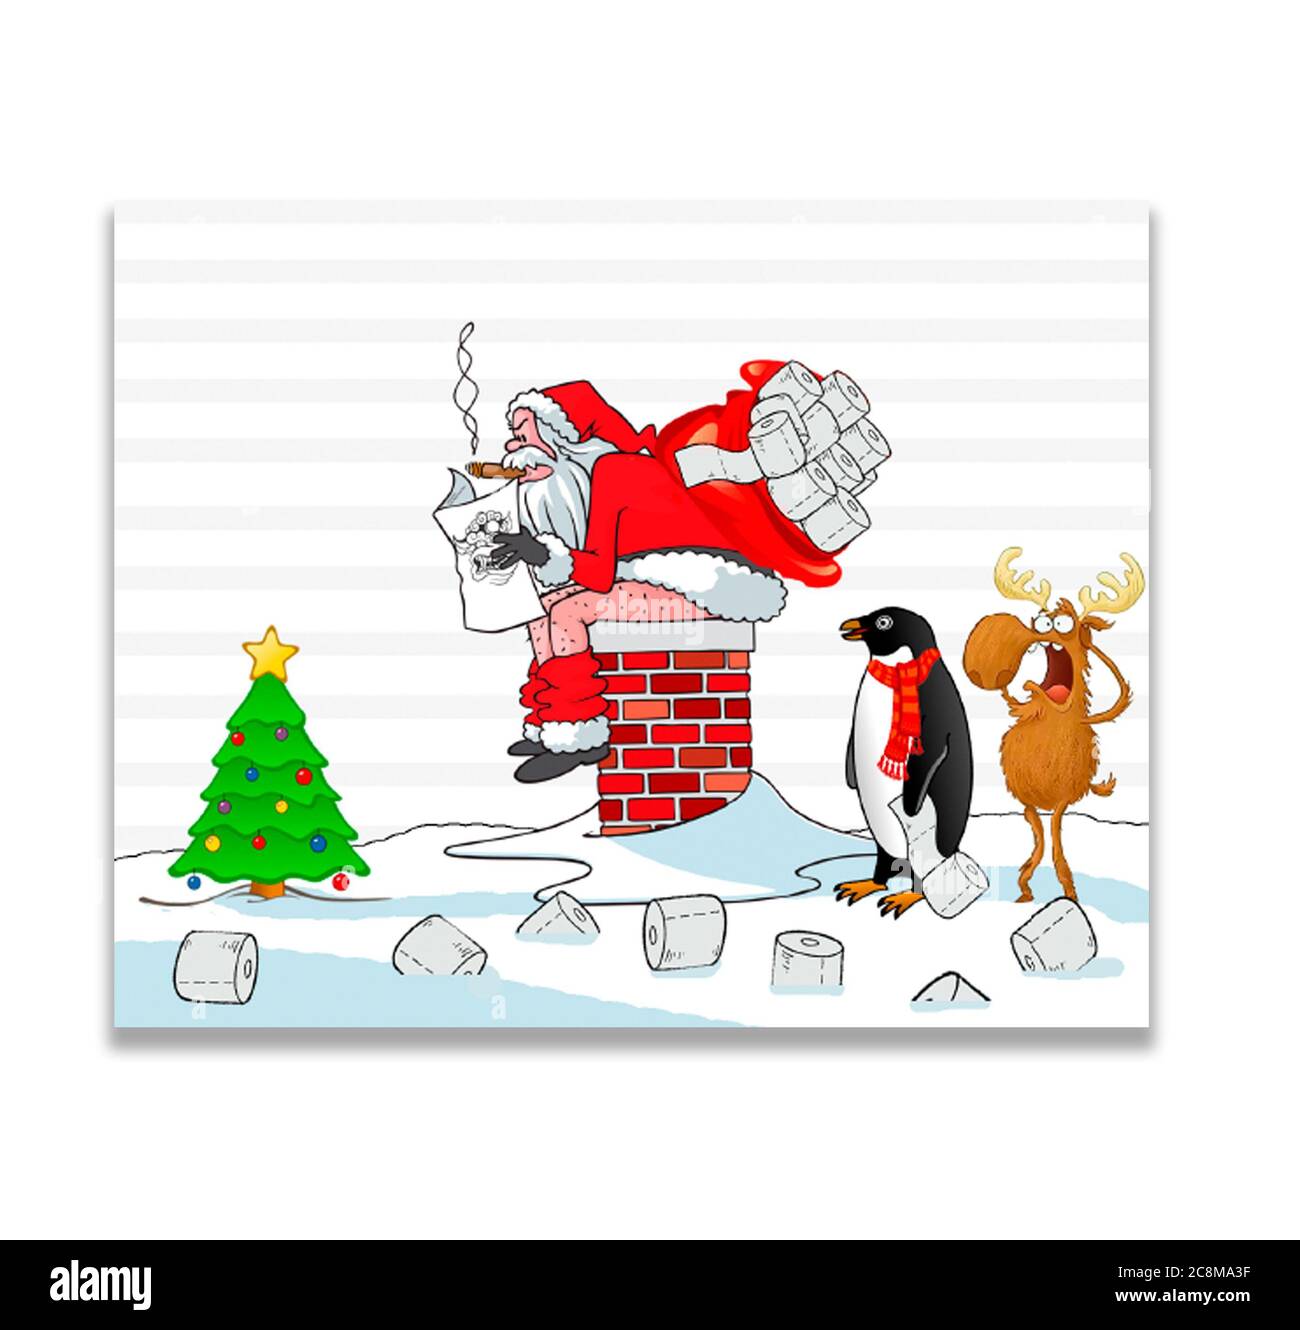 Santa, penguin and deer near the new year tree on the roof of the house, isolated on white, illustration Stock Photo